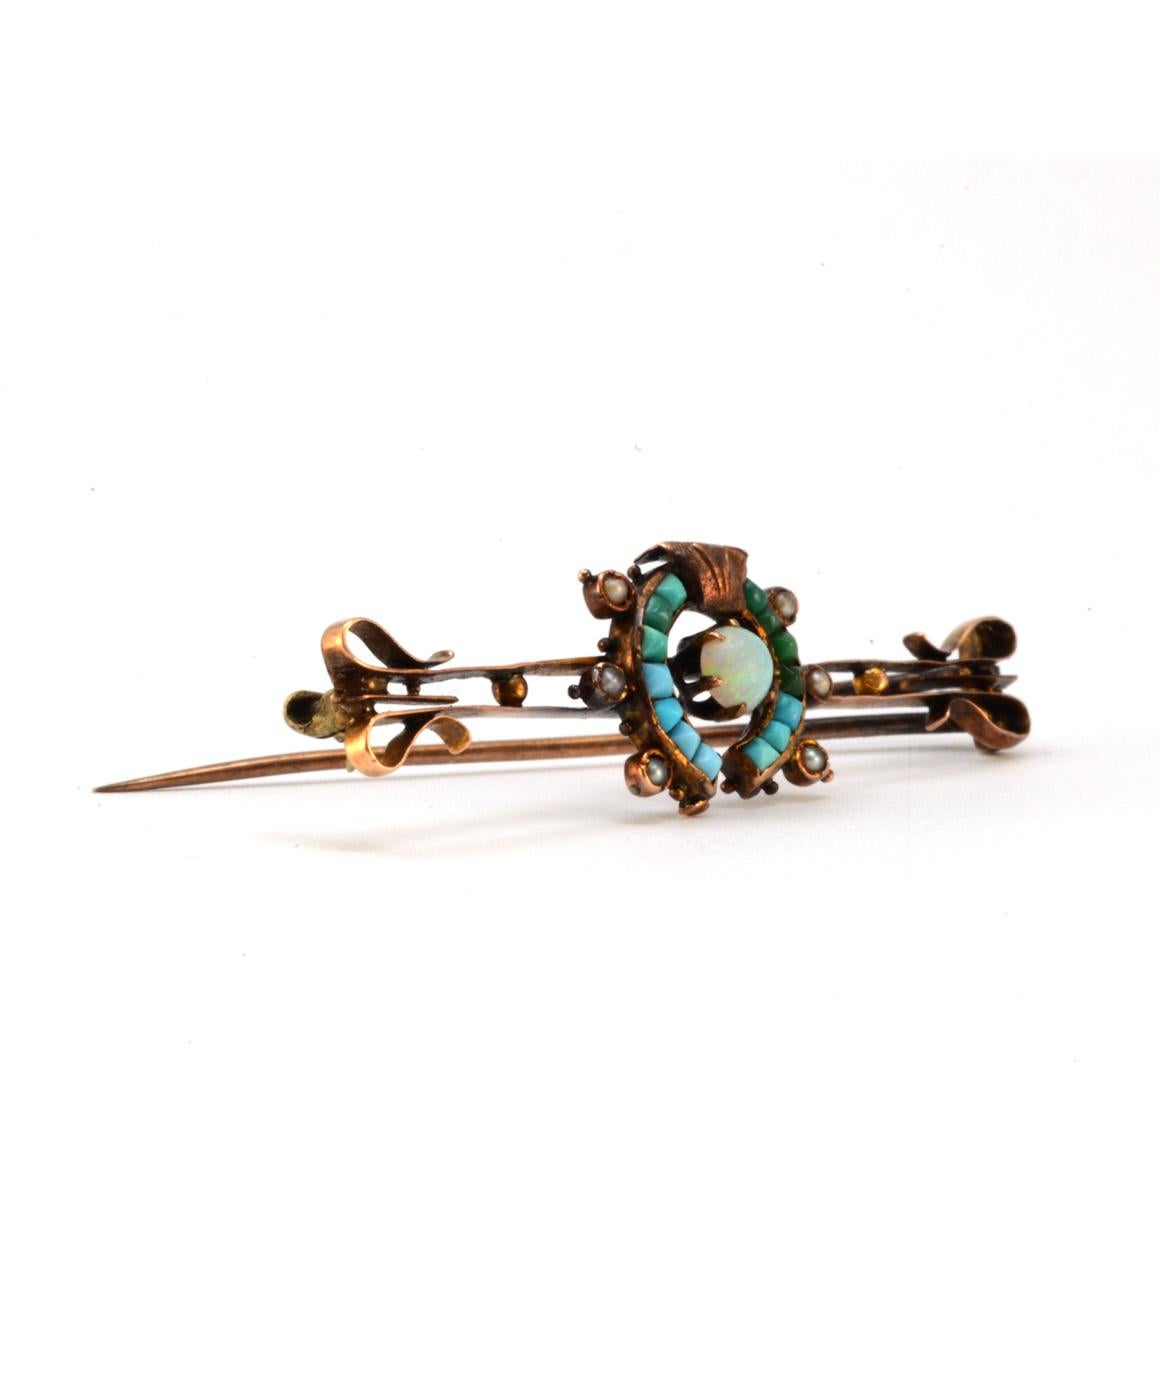 Solid 10K Victorian Pin with Genuine Opal & Turquoise in Excellent Condition! This Victorian pin has 7 opals, approximately .26cttw, and 14 turquoise stones, approximately .39cttw. This pin weighs about 3.2 grams, and is about 2 inches x .5 inches.